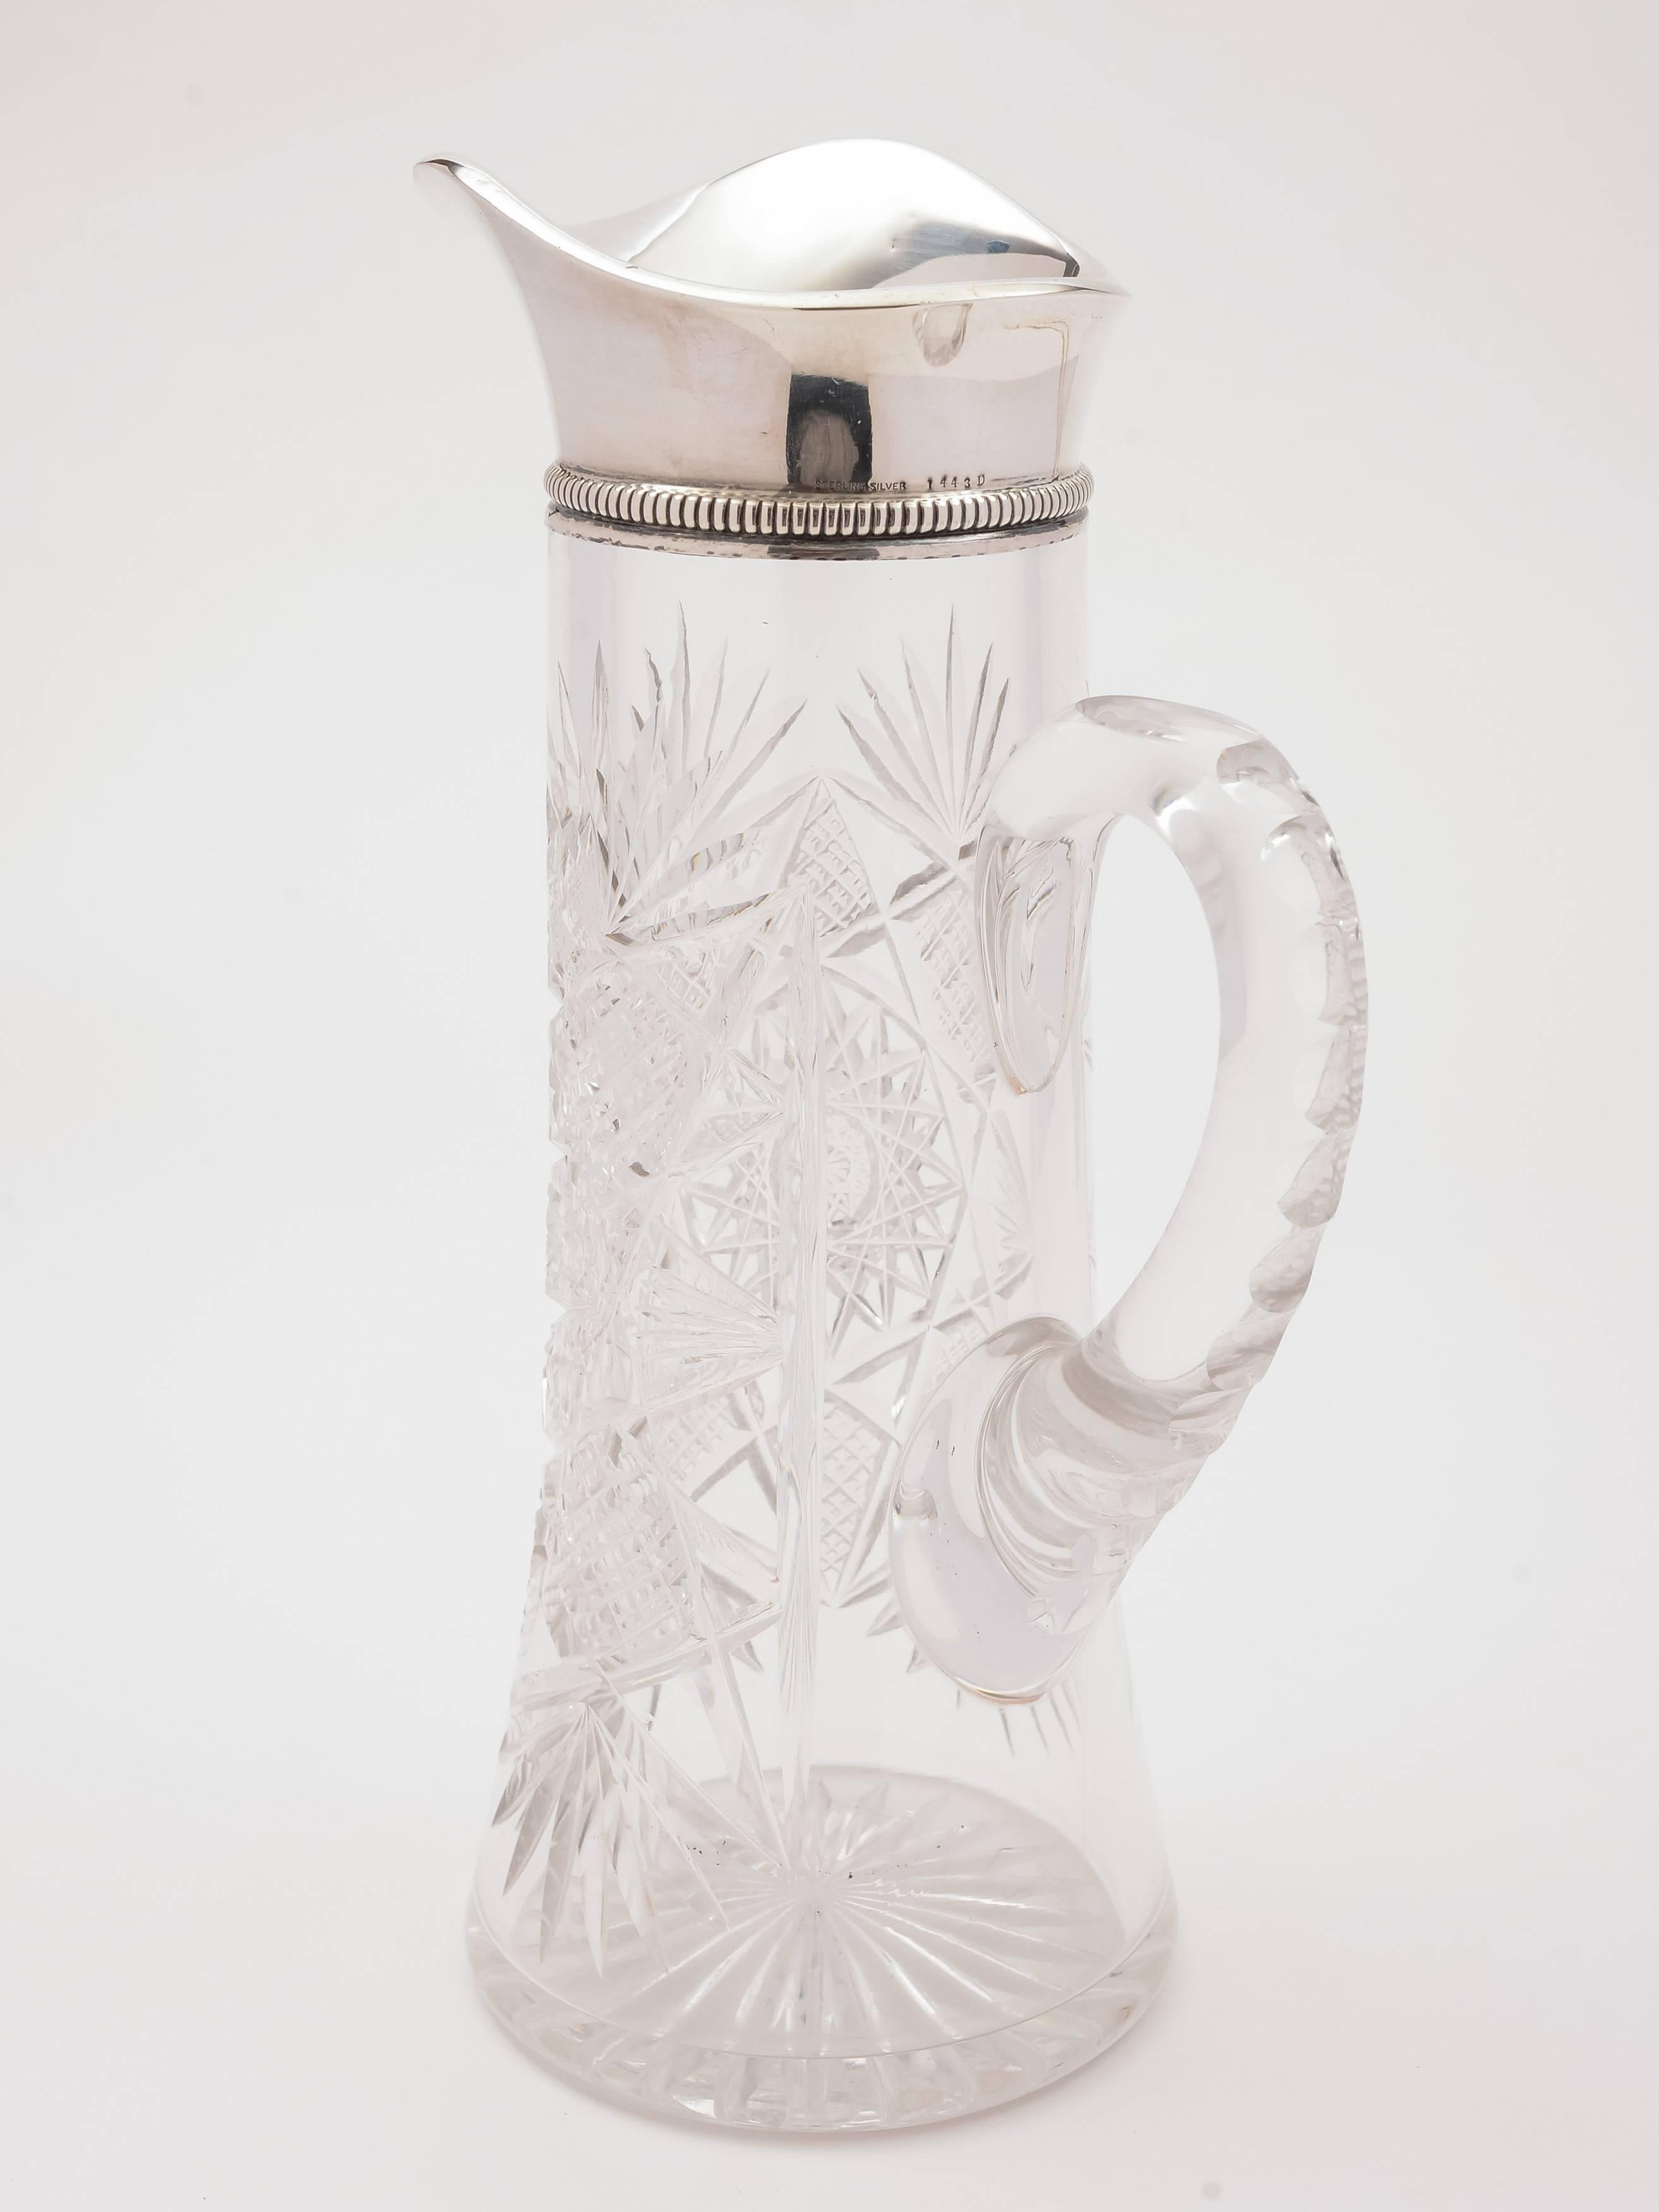 American Silver Topped Jug or Pitcher, 1905 In Good Condition For Sale In Umberleigh, Devon